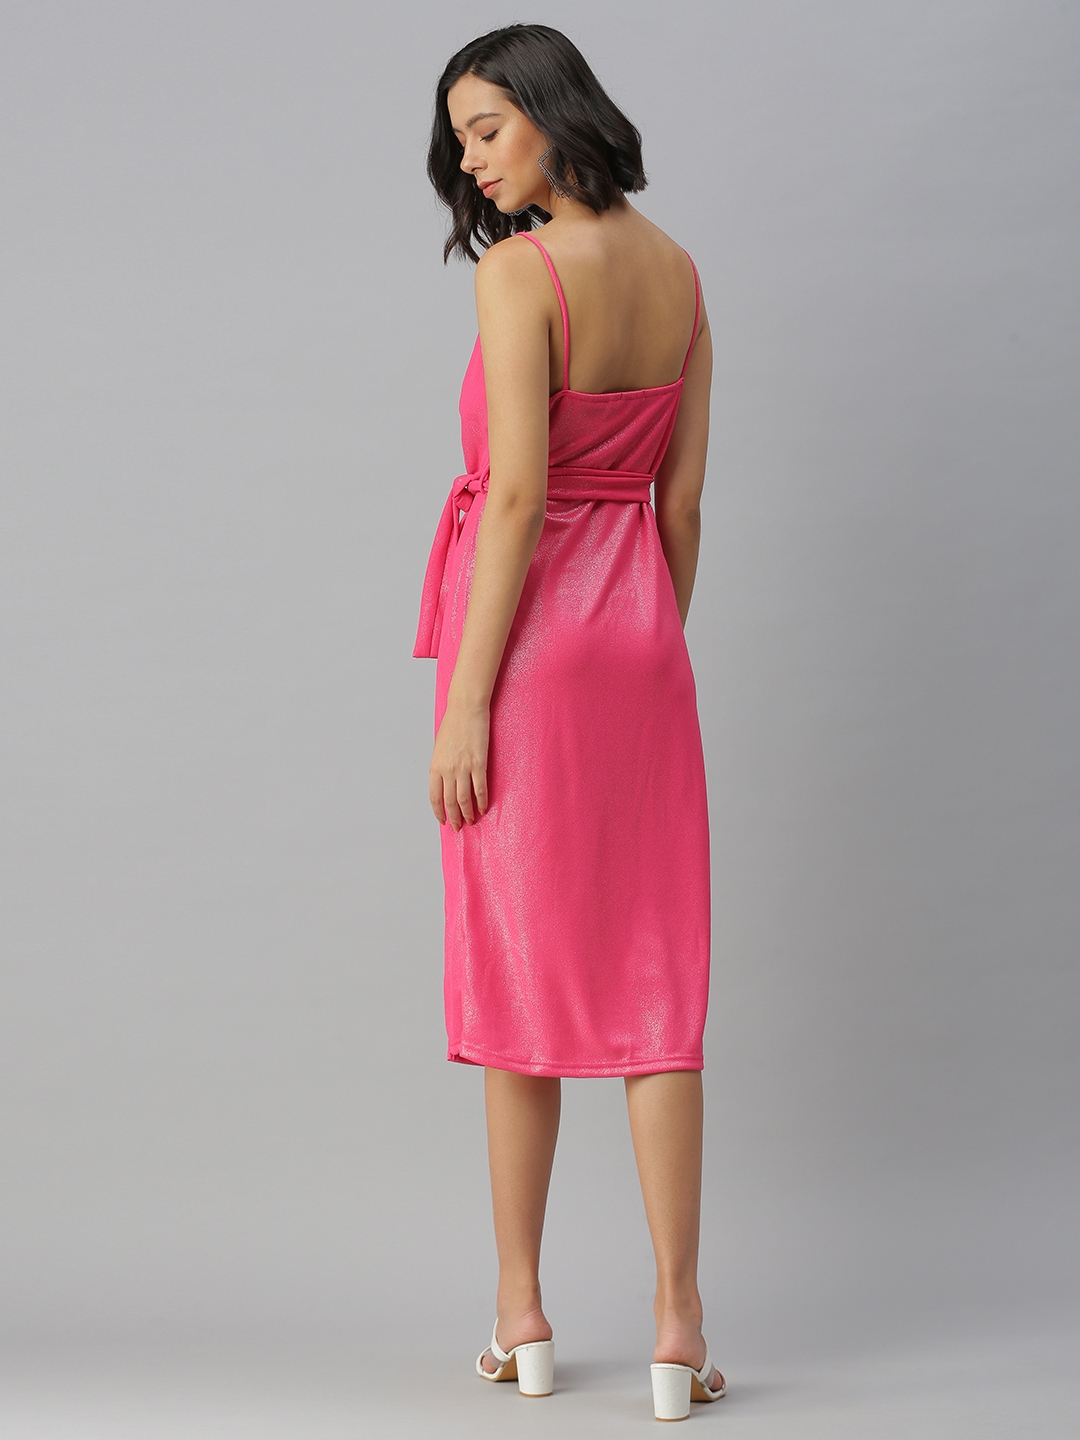 Women's Pink Synthetic Solid Dresses